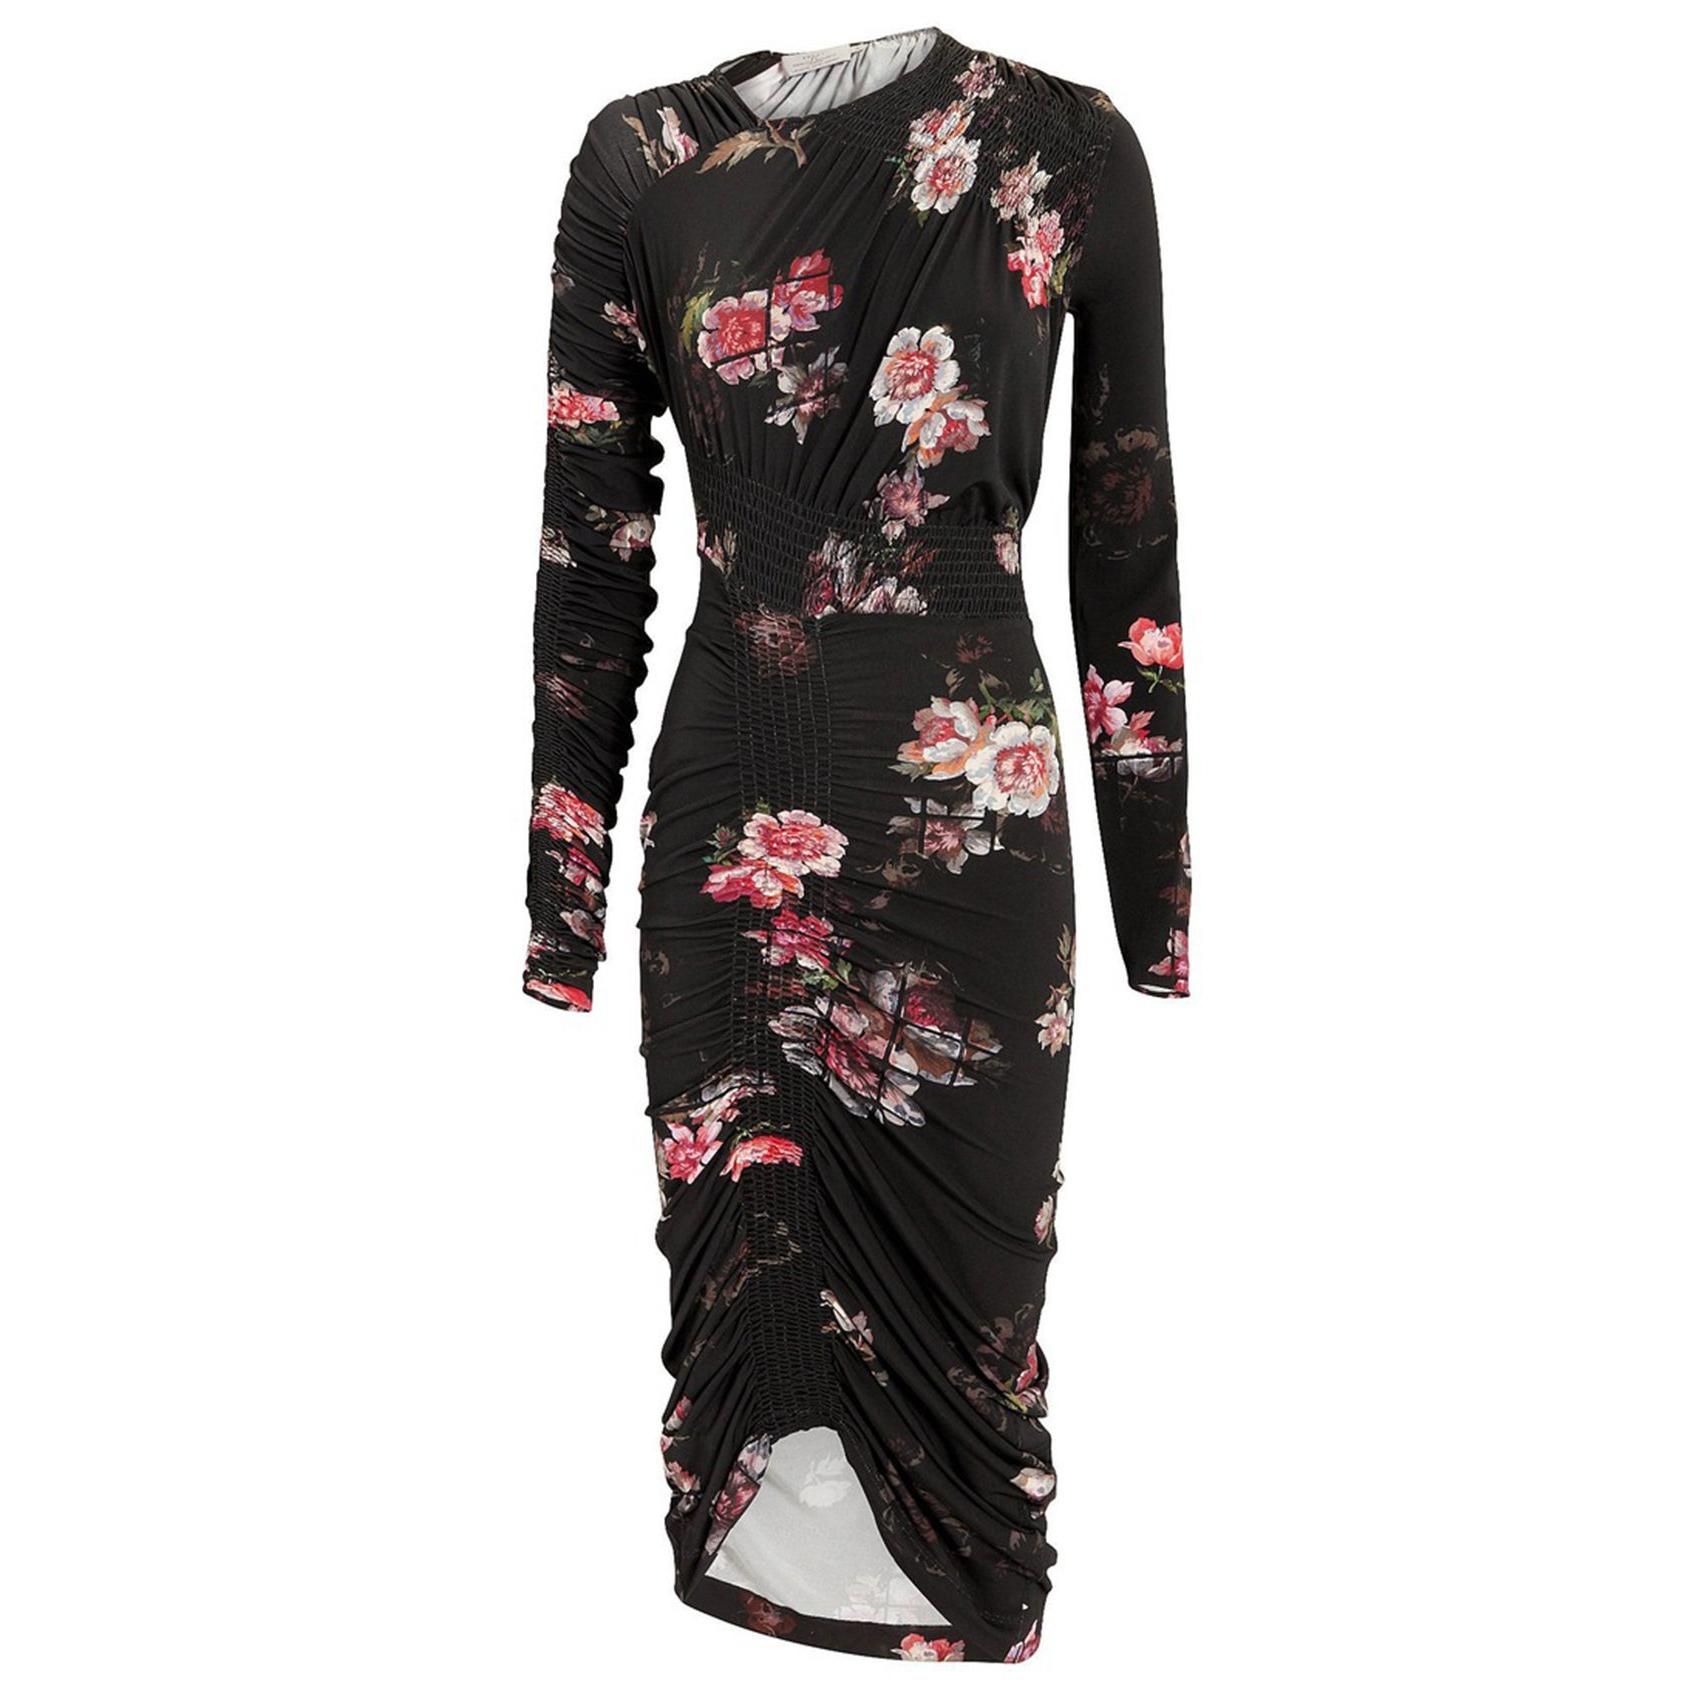 Preen by Thornton Bregazzi Rene Floral Ruched Dress